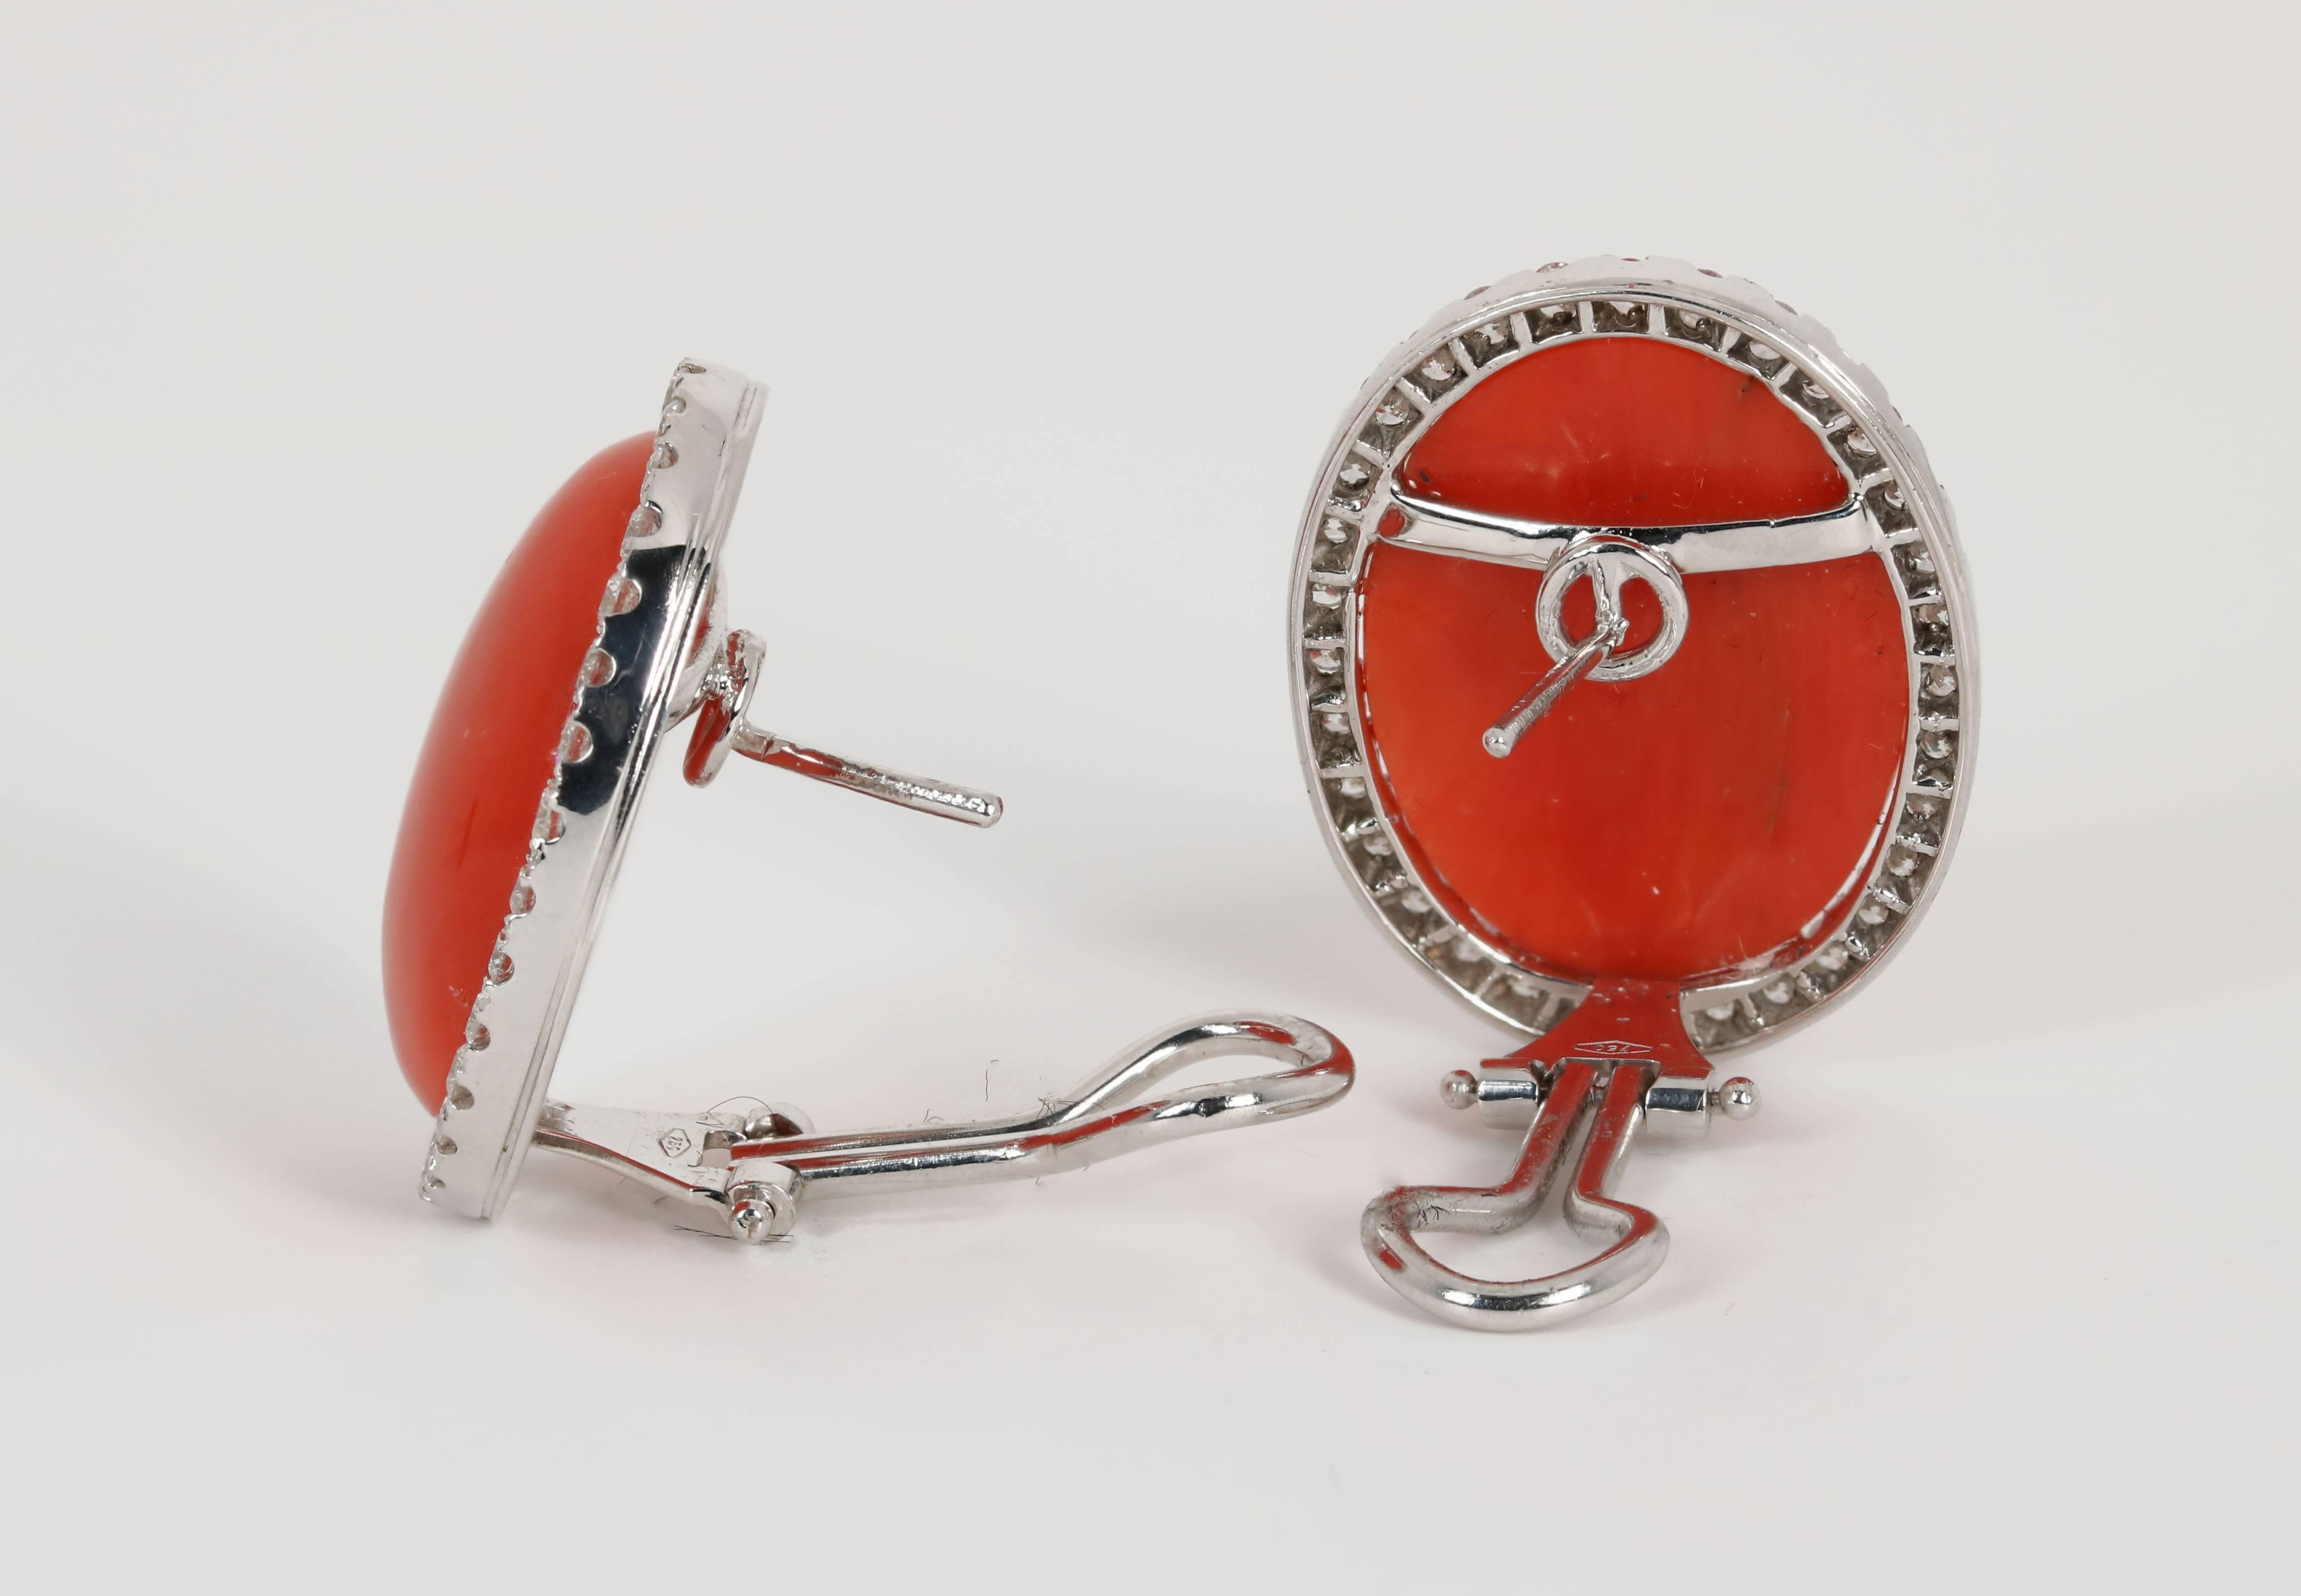 18K white gold coral and diamond earrings
26 carats of coral, 2 carats of diamonds